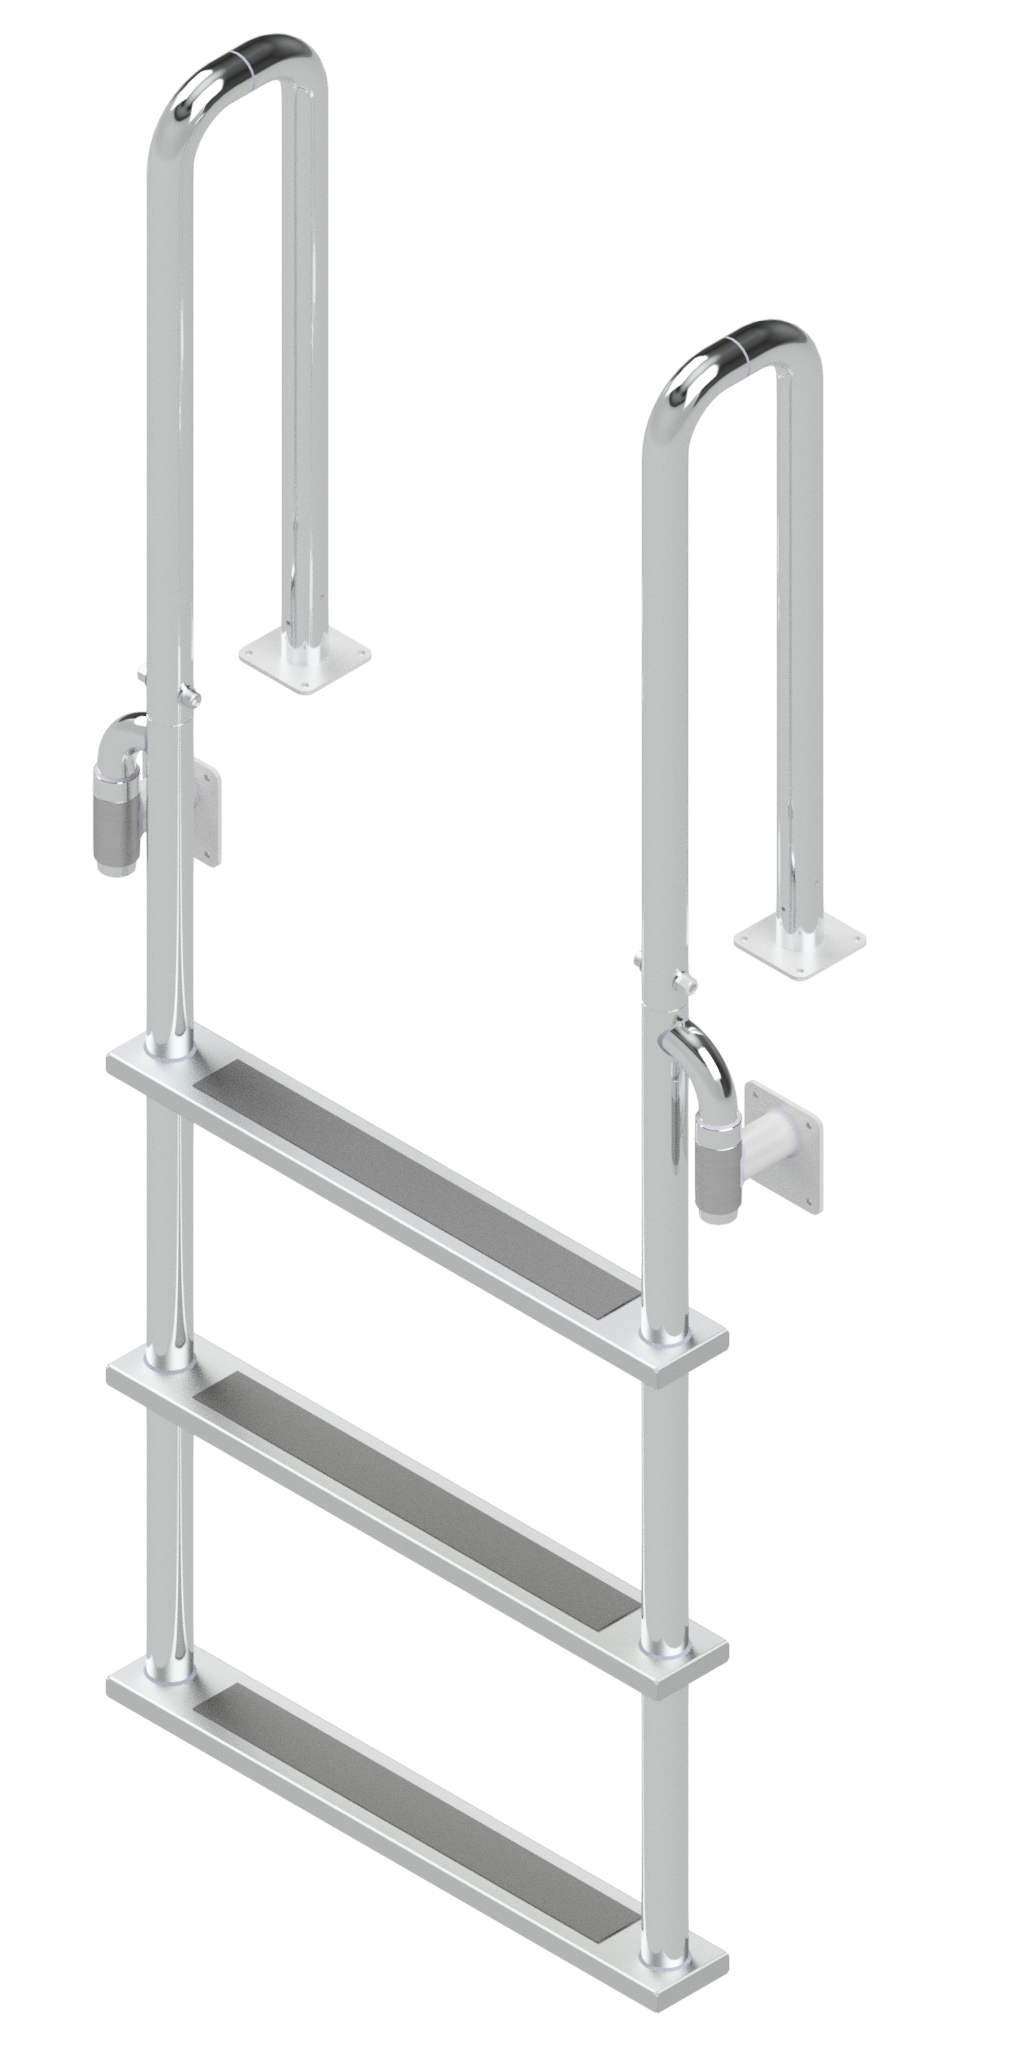 L-1200-LB Three-Step Stainless Steel Dock Ladder, Front Mount, Welded Flanges - 6" Handles